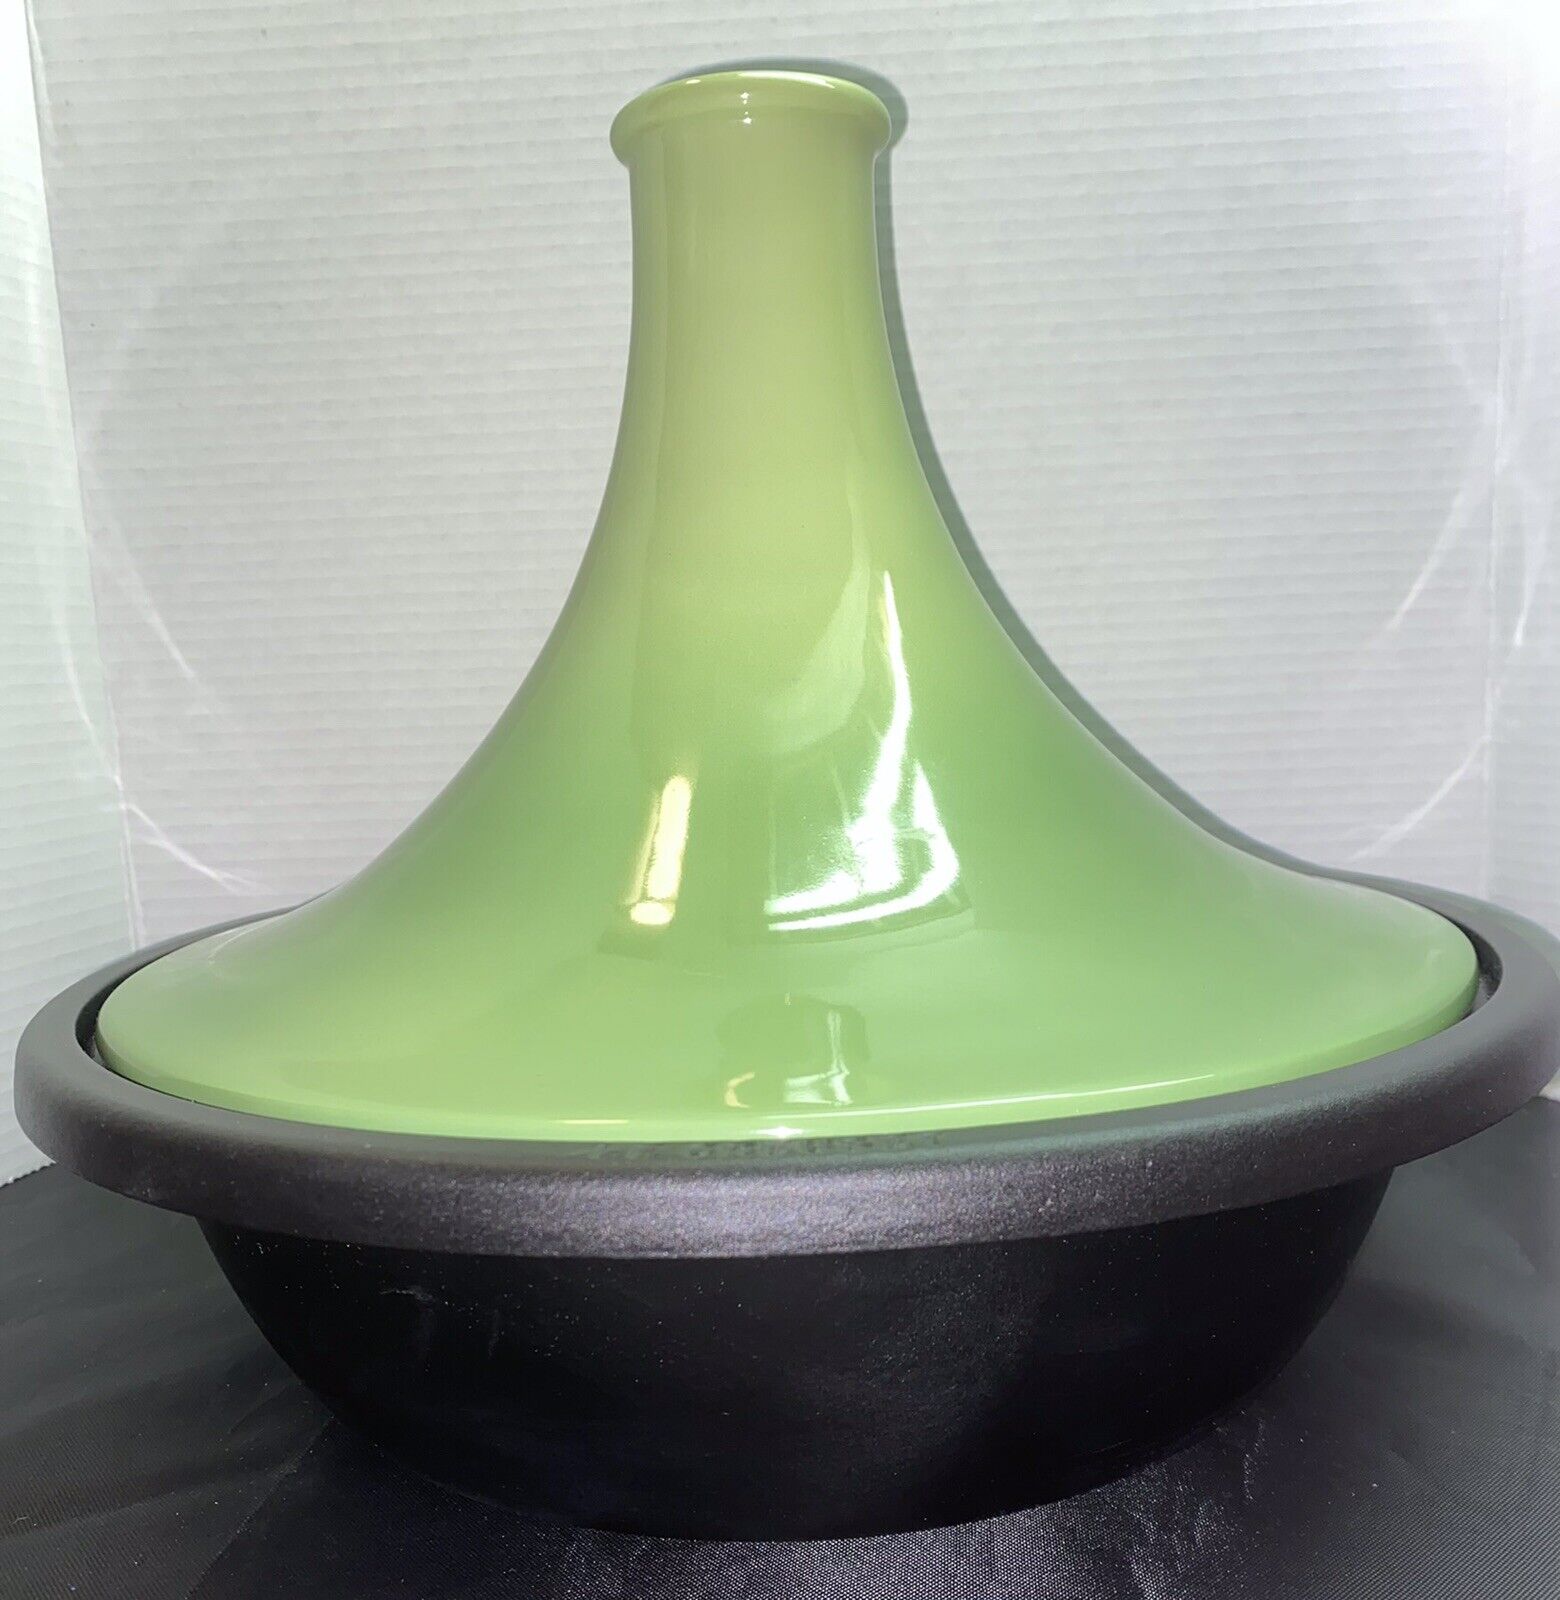 Le Creuset 35 Cm Large Tagine Palm Green Cast Iron/stoneware Top New In Box.